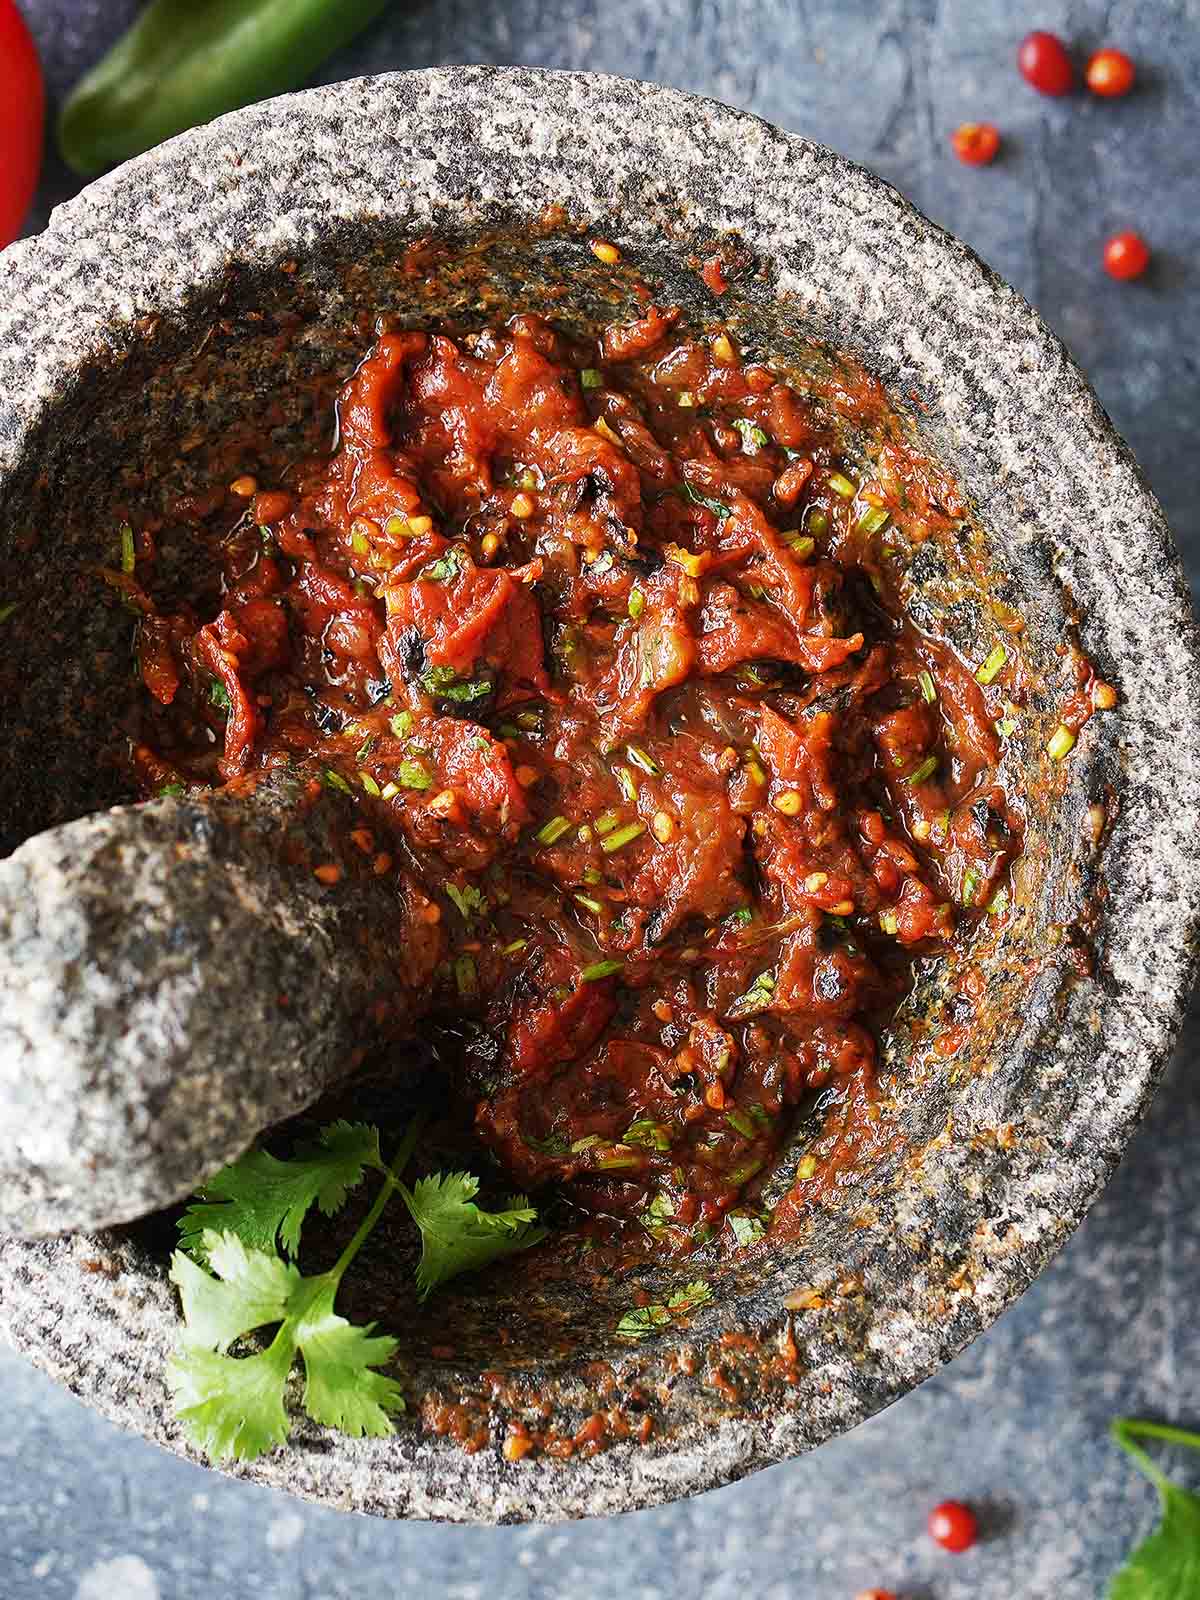 Chunky salsa with roasted vegetables in a molcajete.